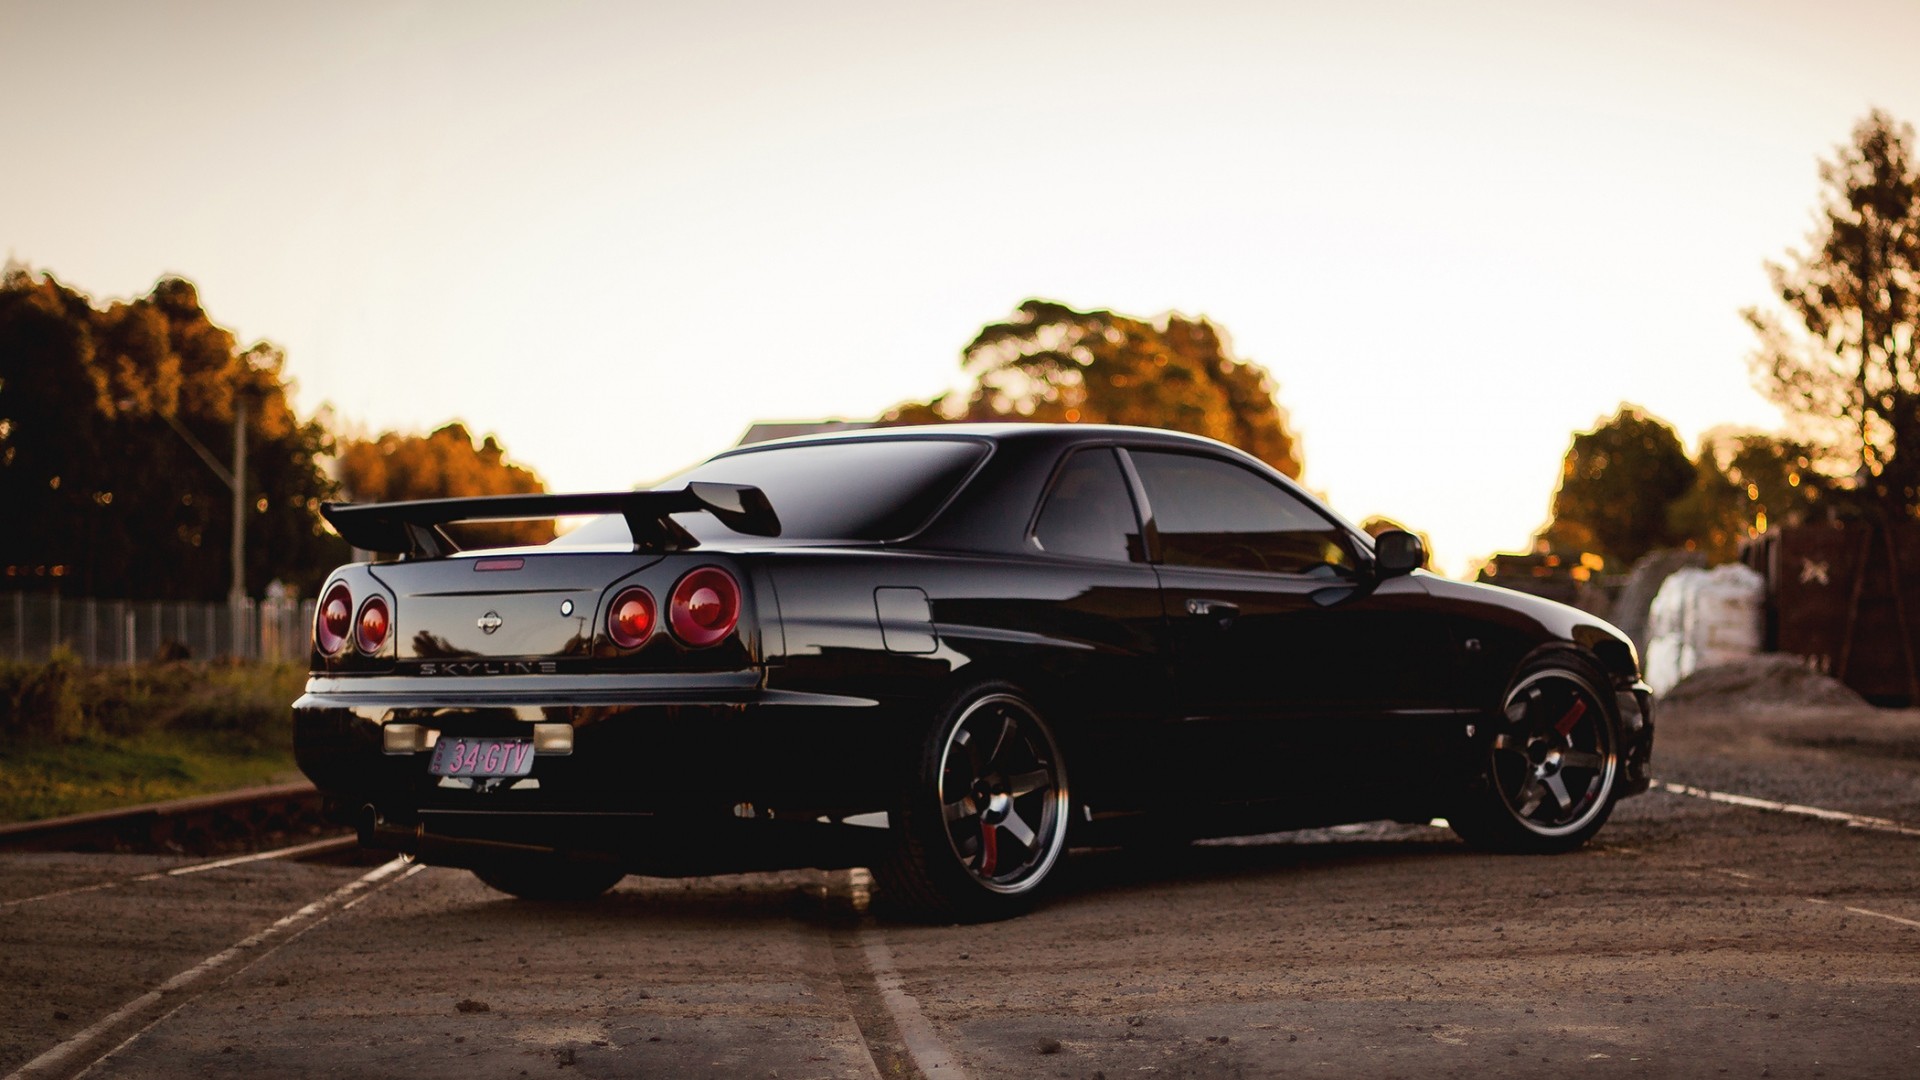 1920x1080 Download now full hd wallpaper nissan skyline coupe blurry ...